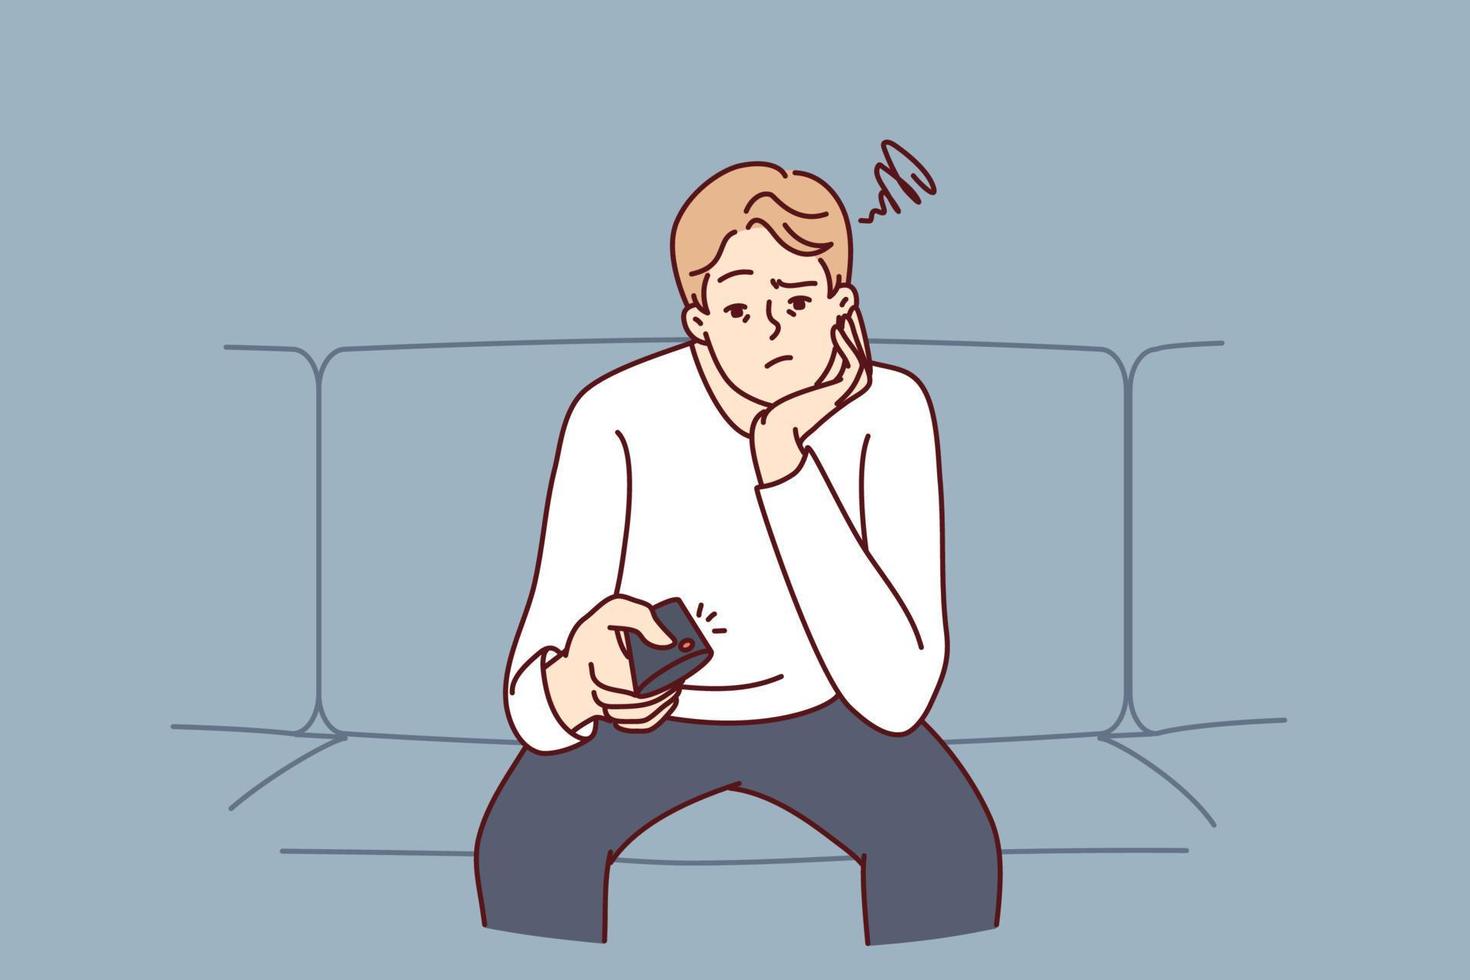 Bored man holding TV remote due to lack of satellite TV channels with interesting shows. Concept frustration and procrastination associated with lack of motivation caused by emotional burnout vector